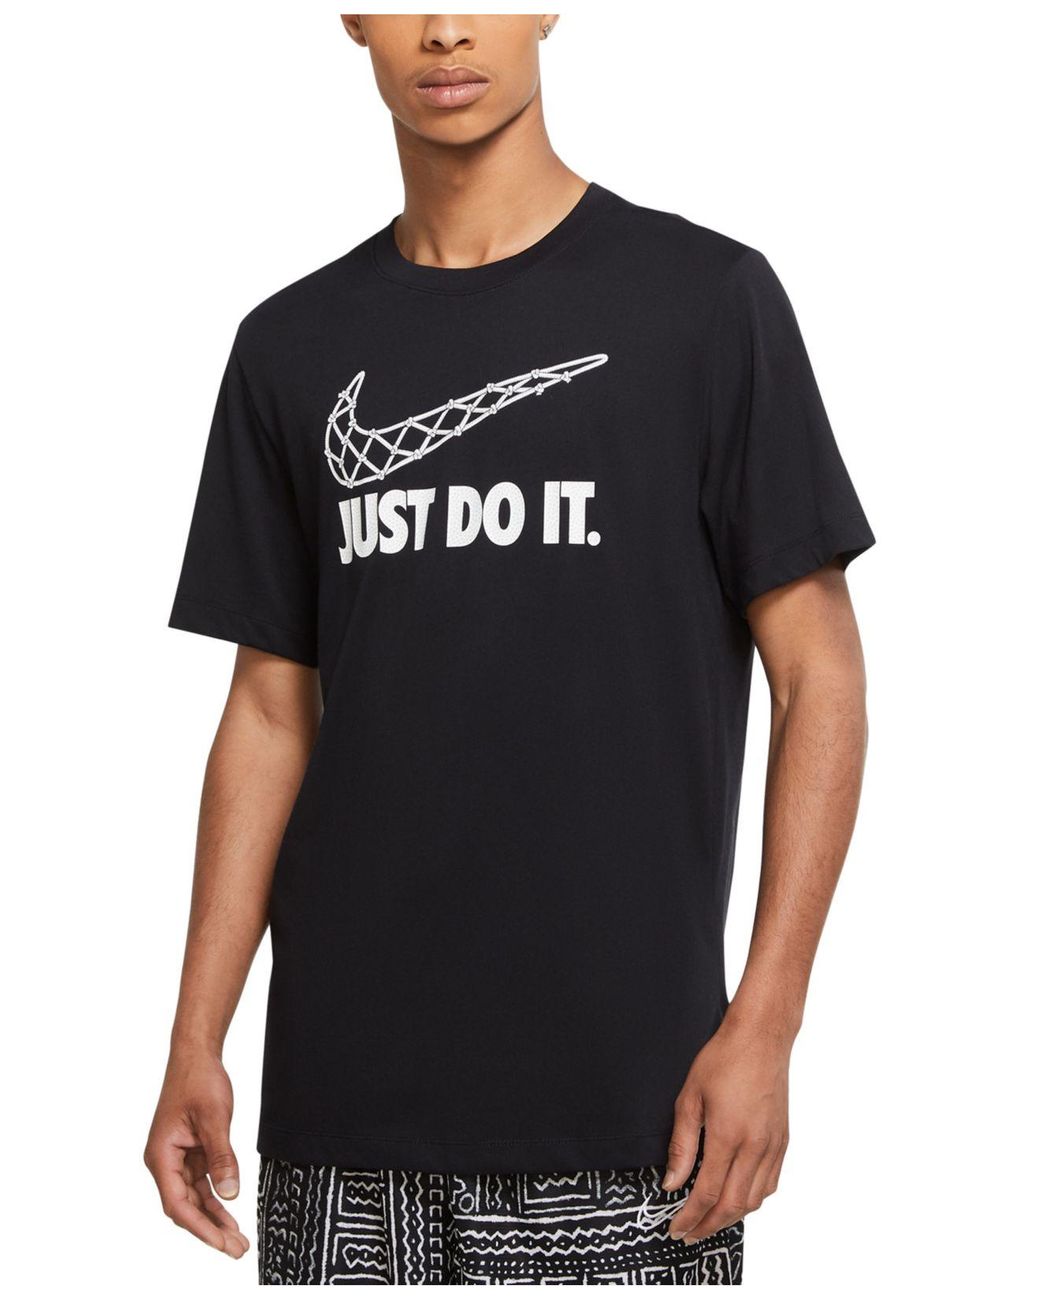 Nike Cotton Dri-fit Just Do It Basketball T-shirt in Black for Men - Lyst